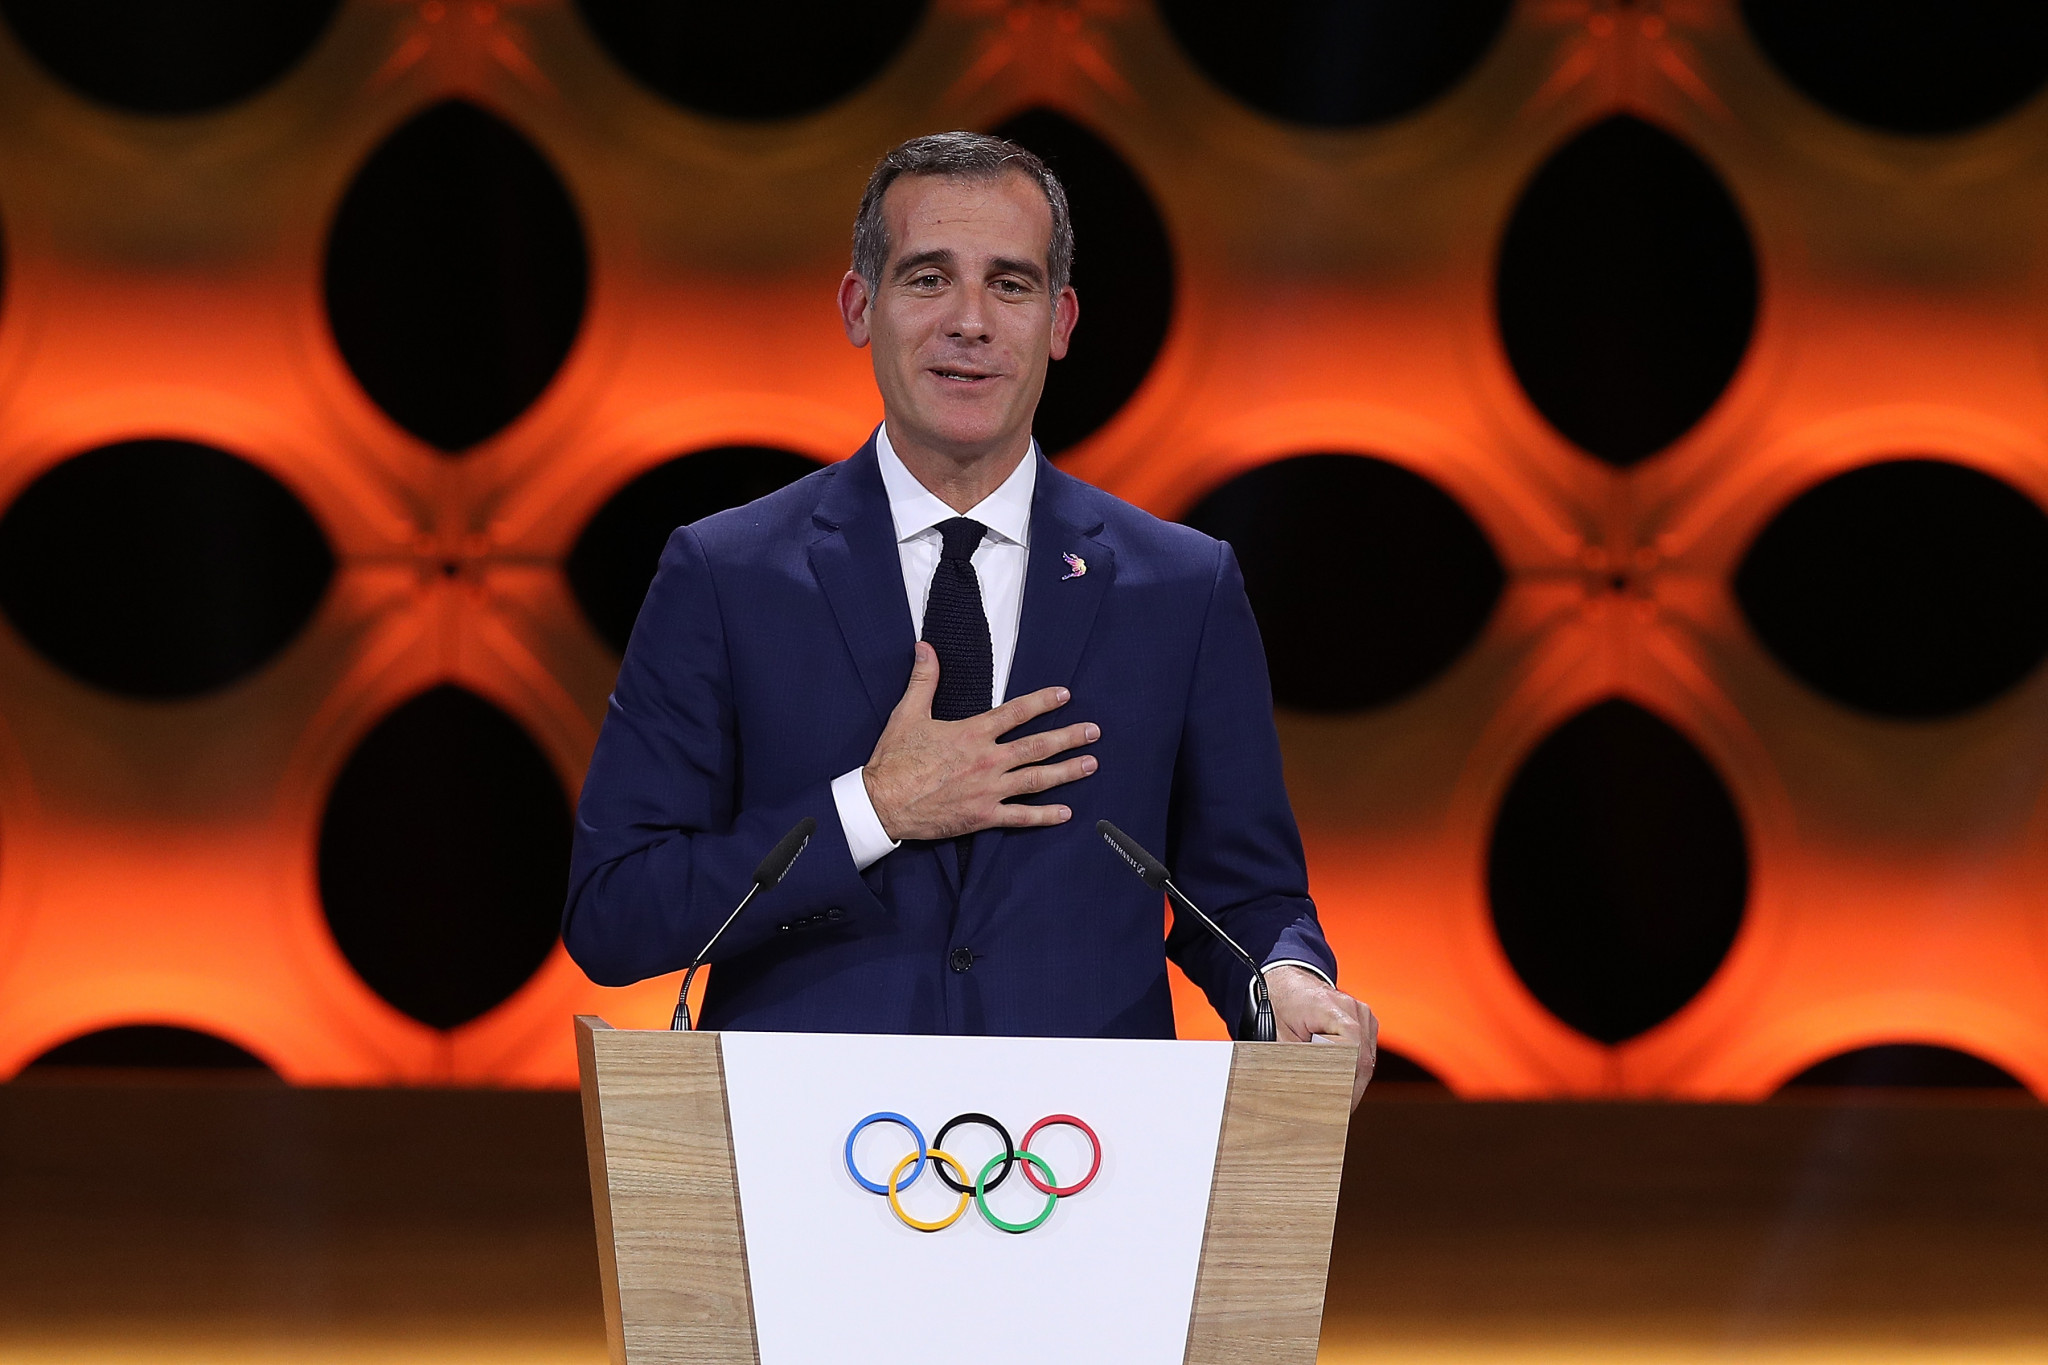 Los Angeles Mayor Eric Garcetti is expected to sign a MoU to establish the California Olympic and Paralympic Safety Command ©Getty Images